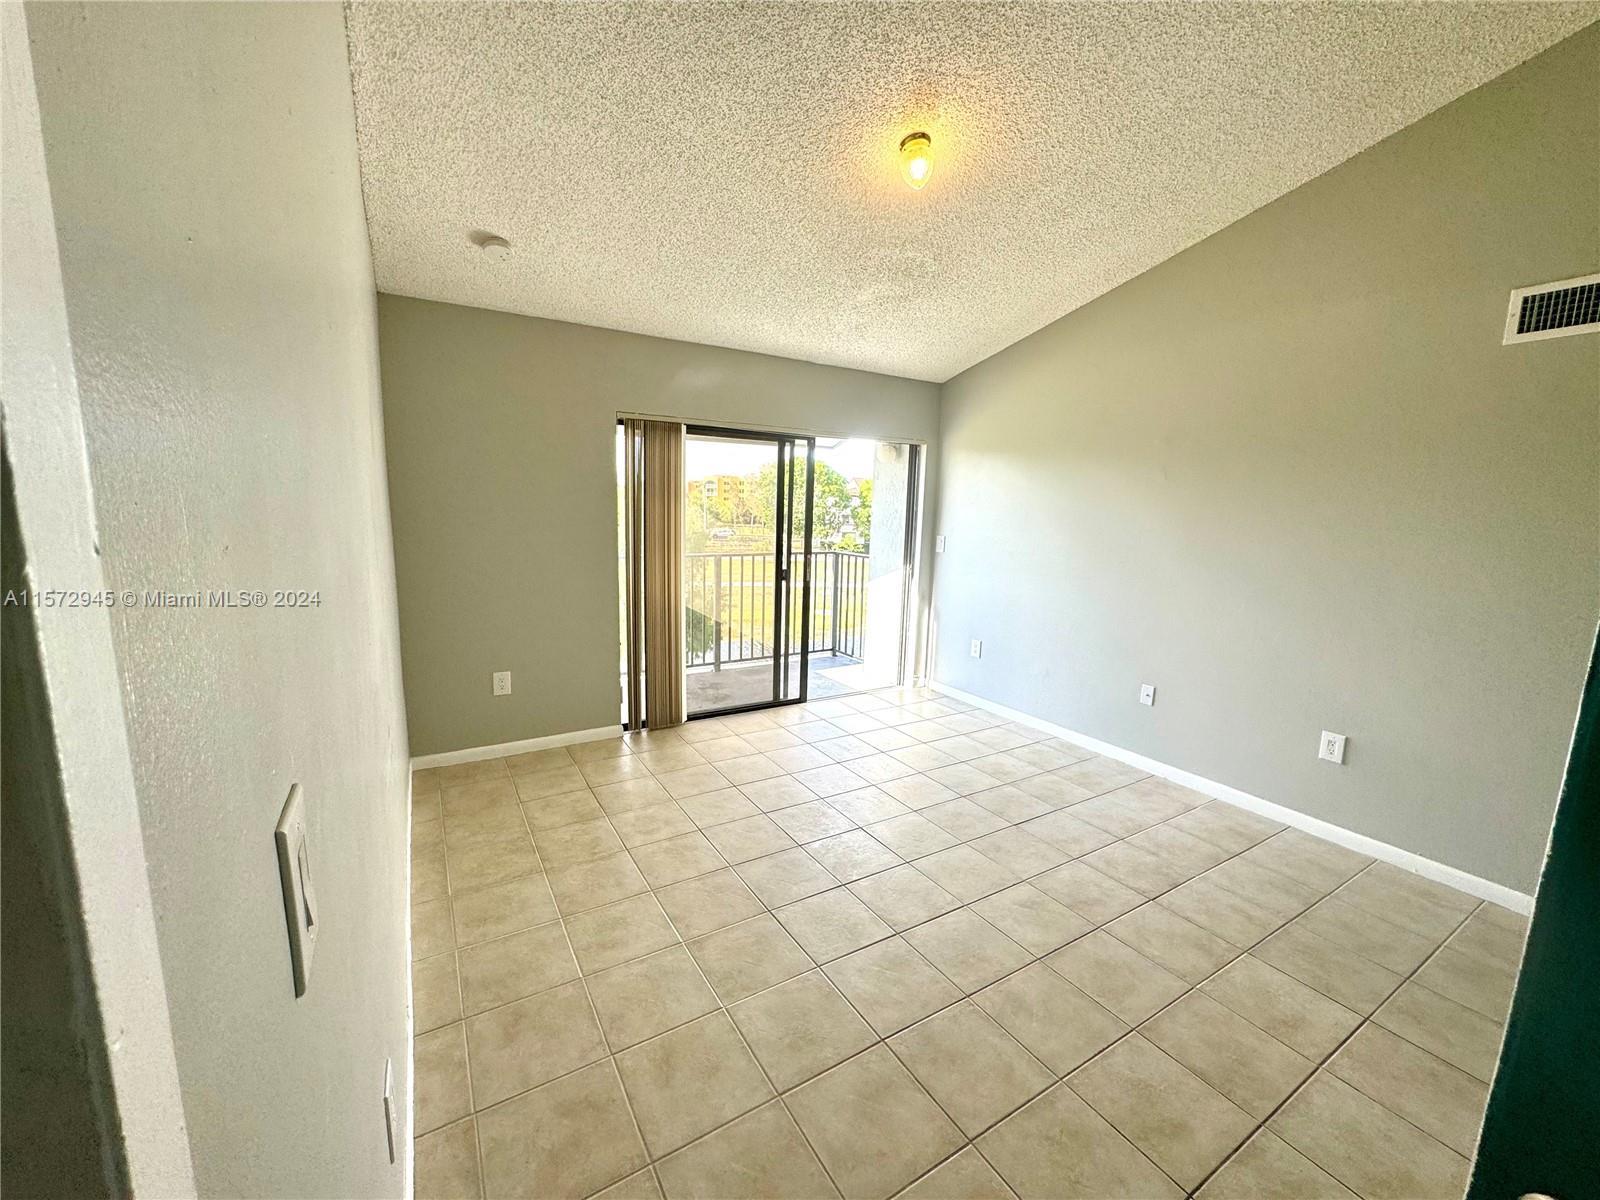 Photo of 7195 NW 179th St #311 in Hialeah, FL